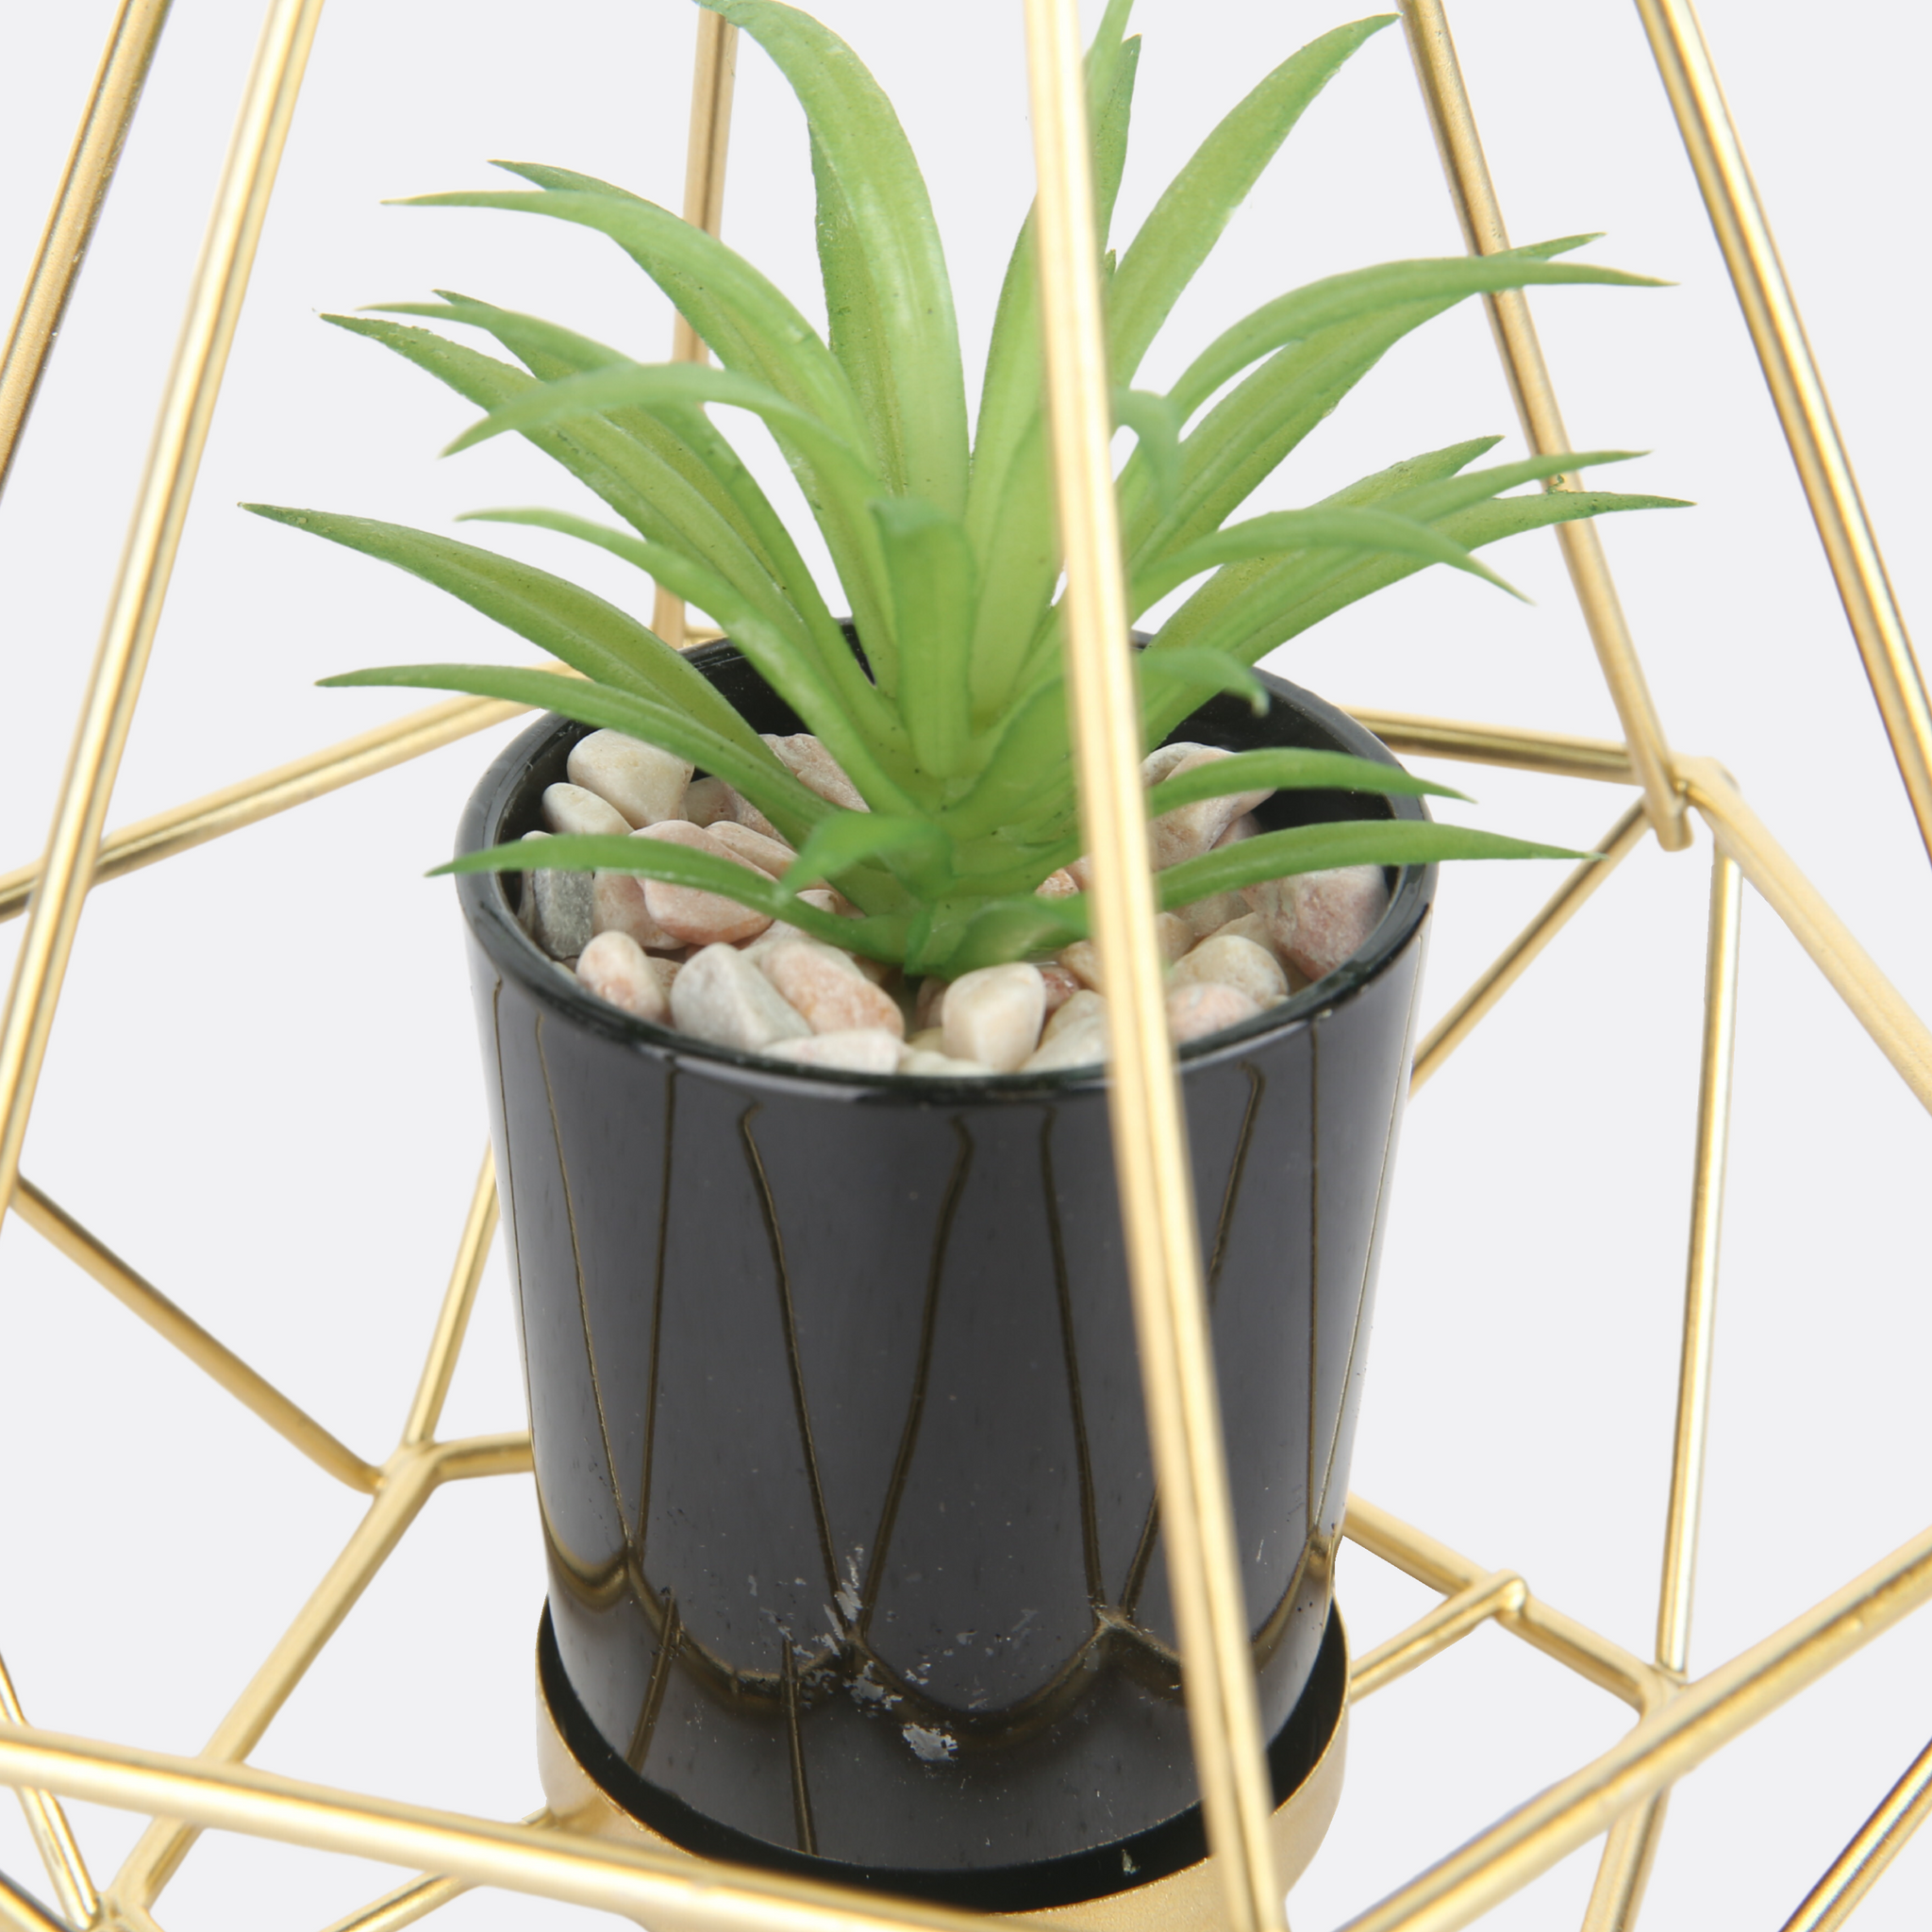 Planter With Acute Metallic Structure